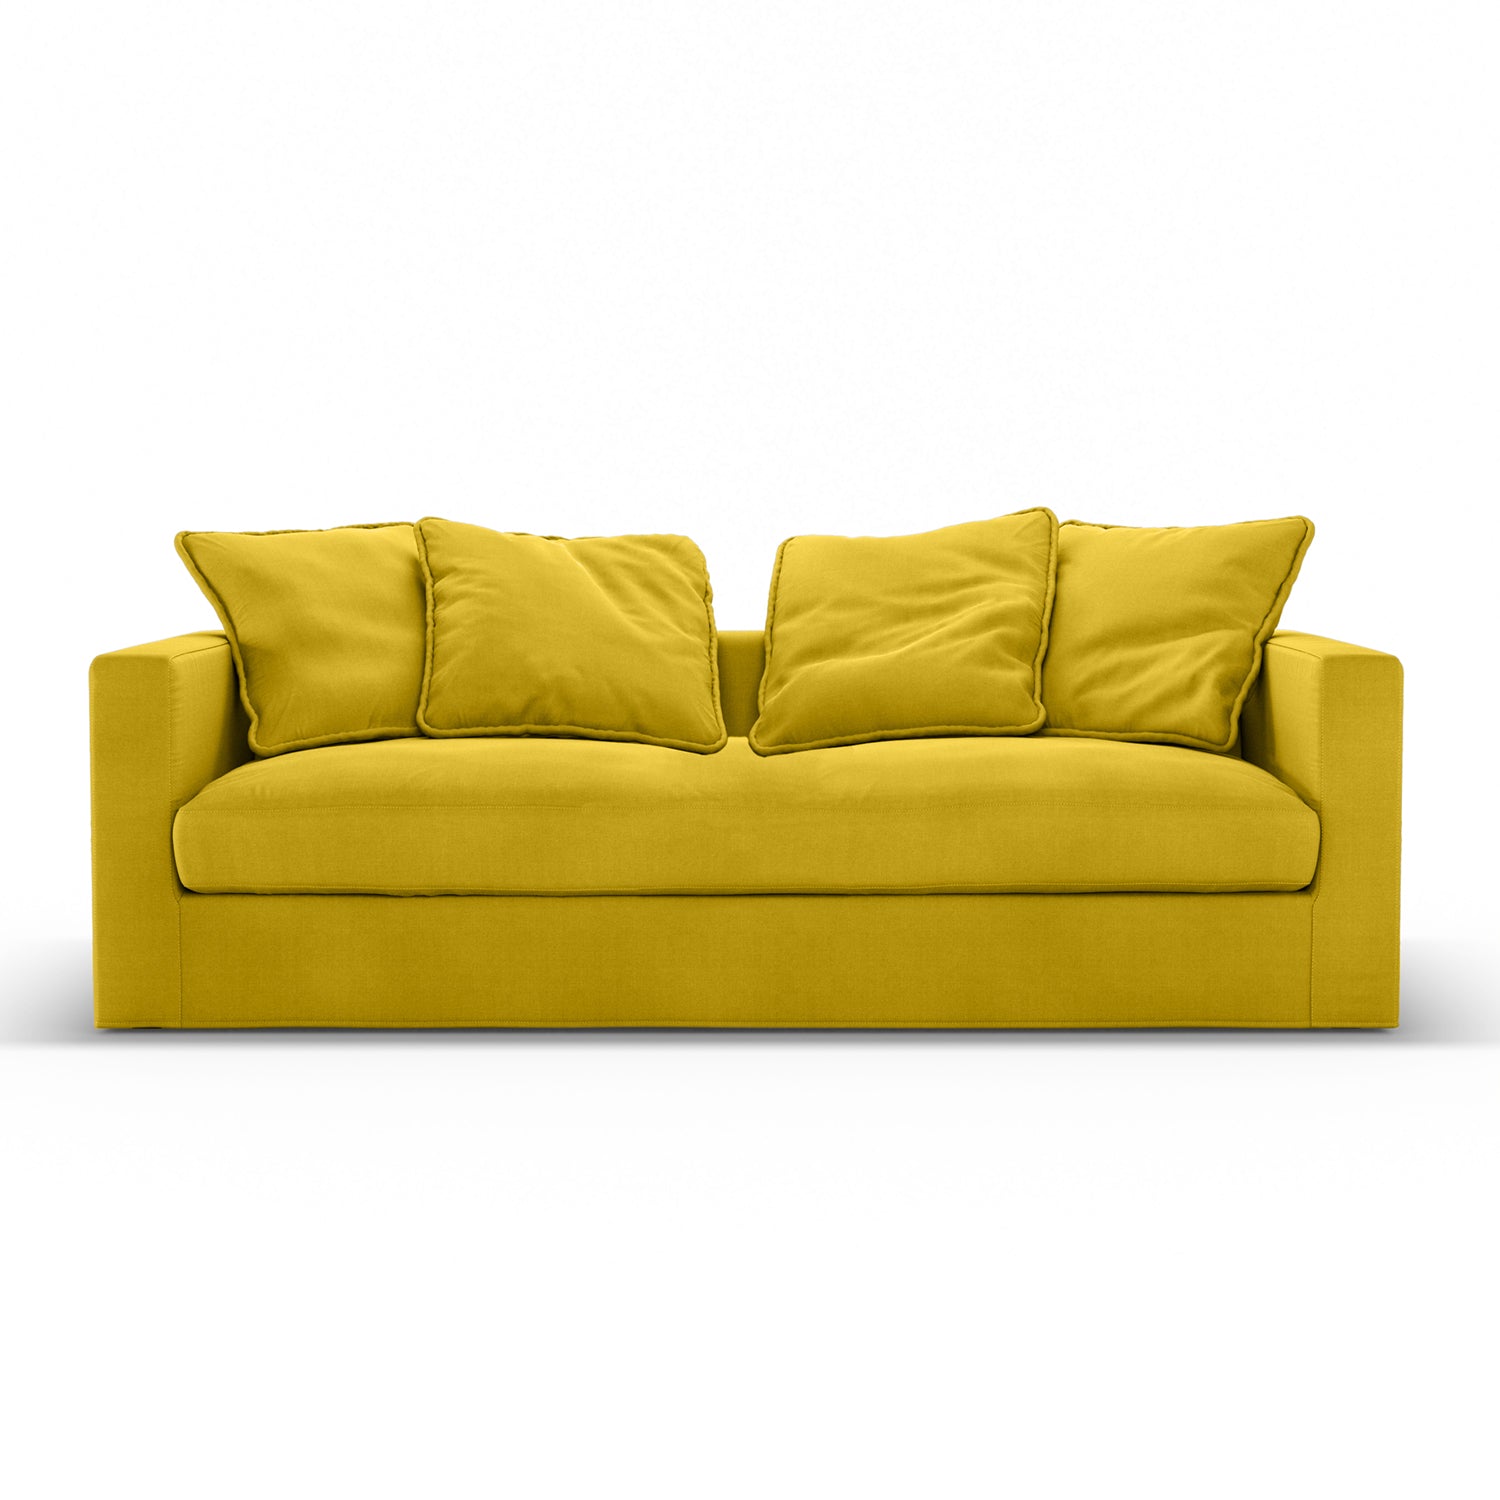 Relaxed Look and Feel, yellow sofa